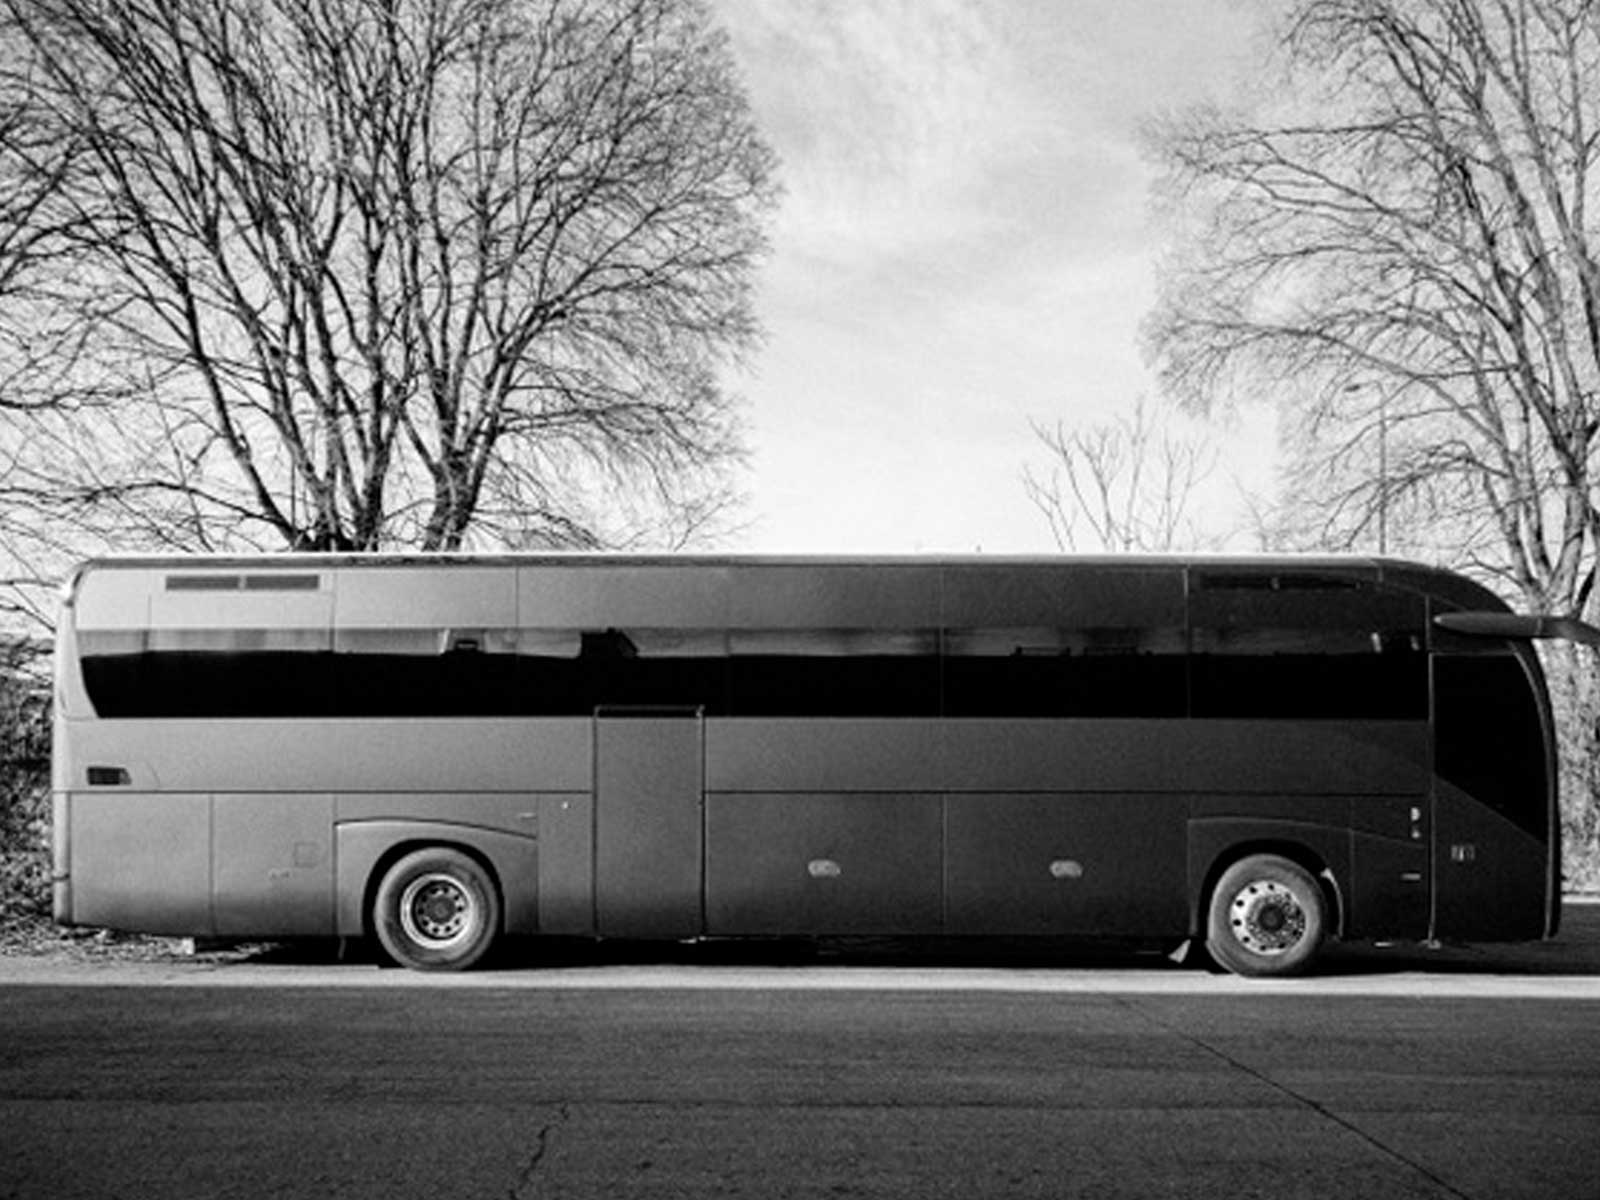 This is the Moncler x Rick Owens custom tour bus